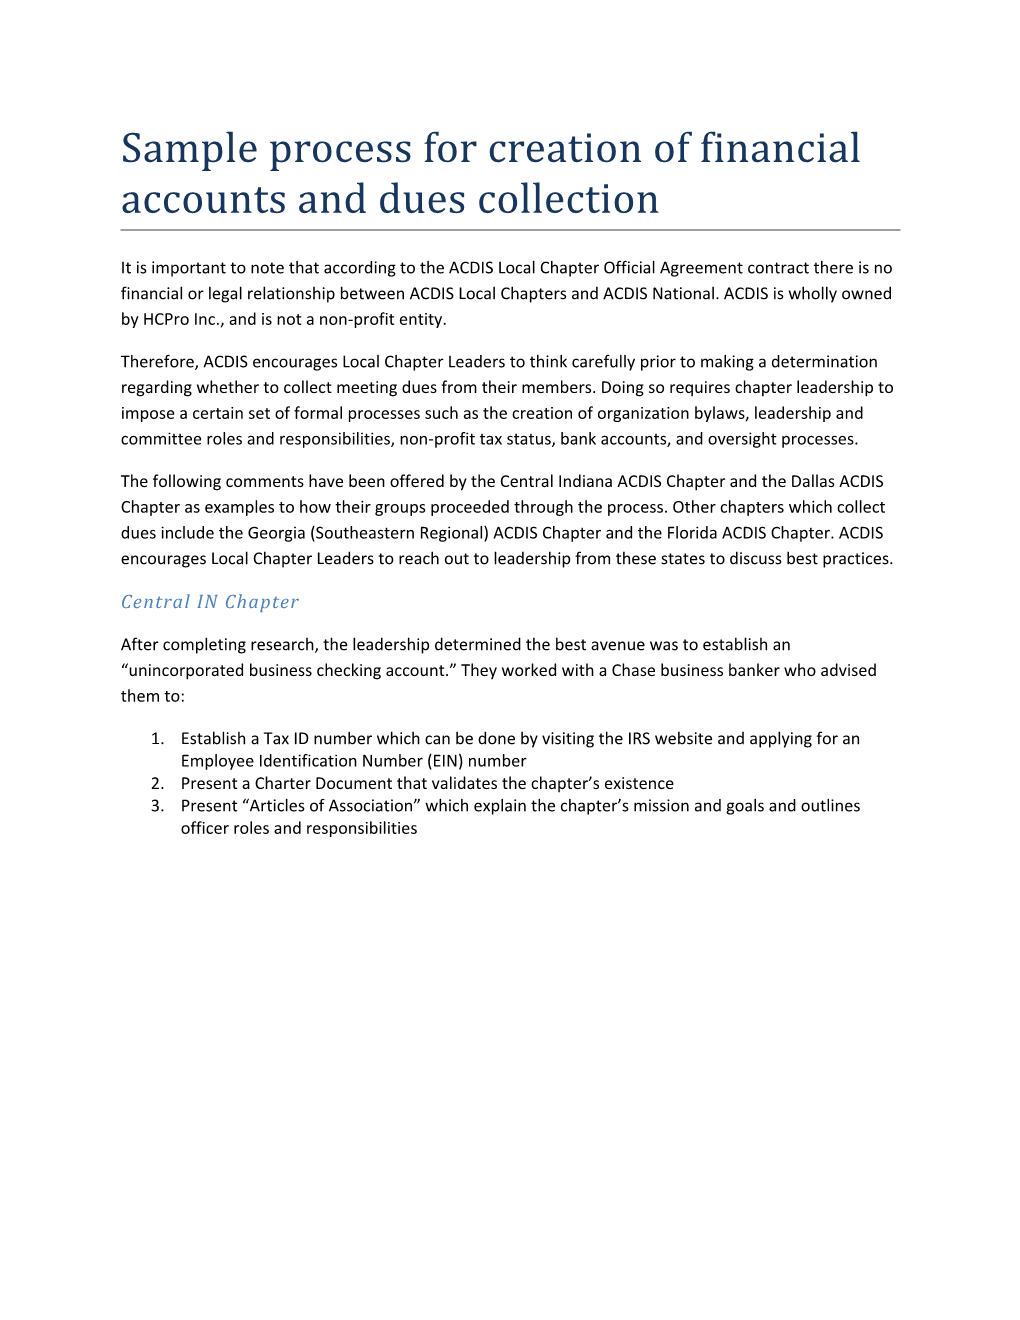 Sample Process for Creation of Financial Accounts and Dues Collection